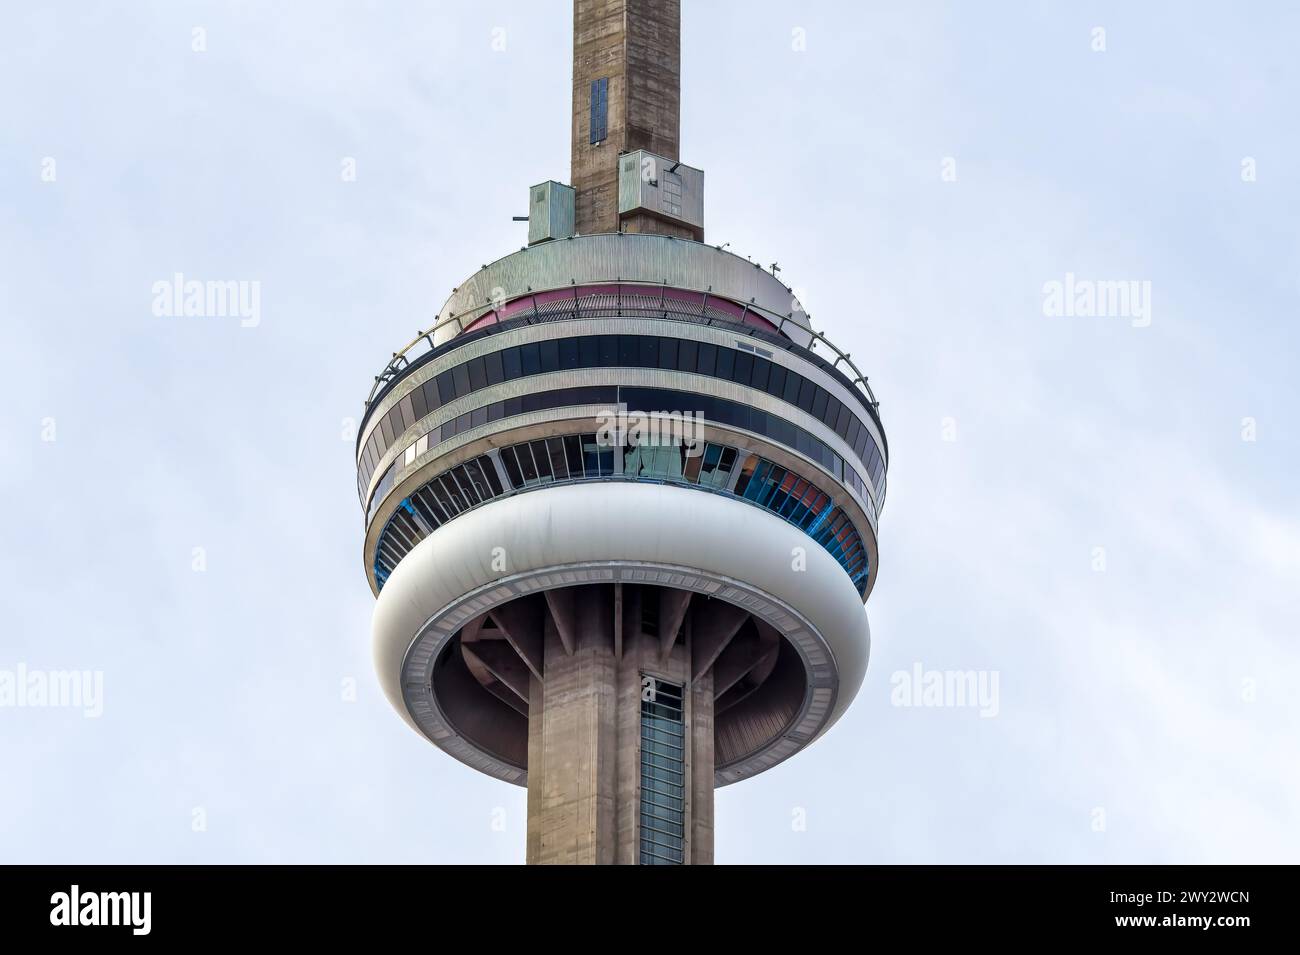 CN Tower or Canadian National Tower, Toronto, Canada Stock Photo